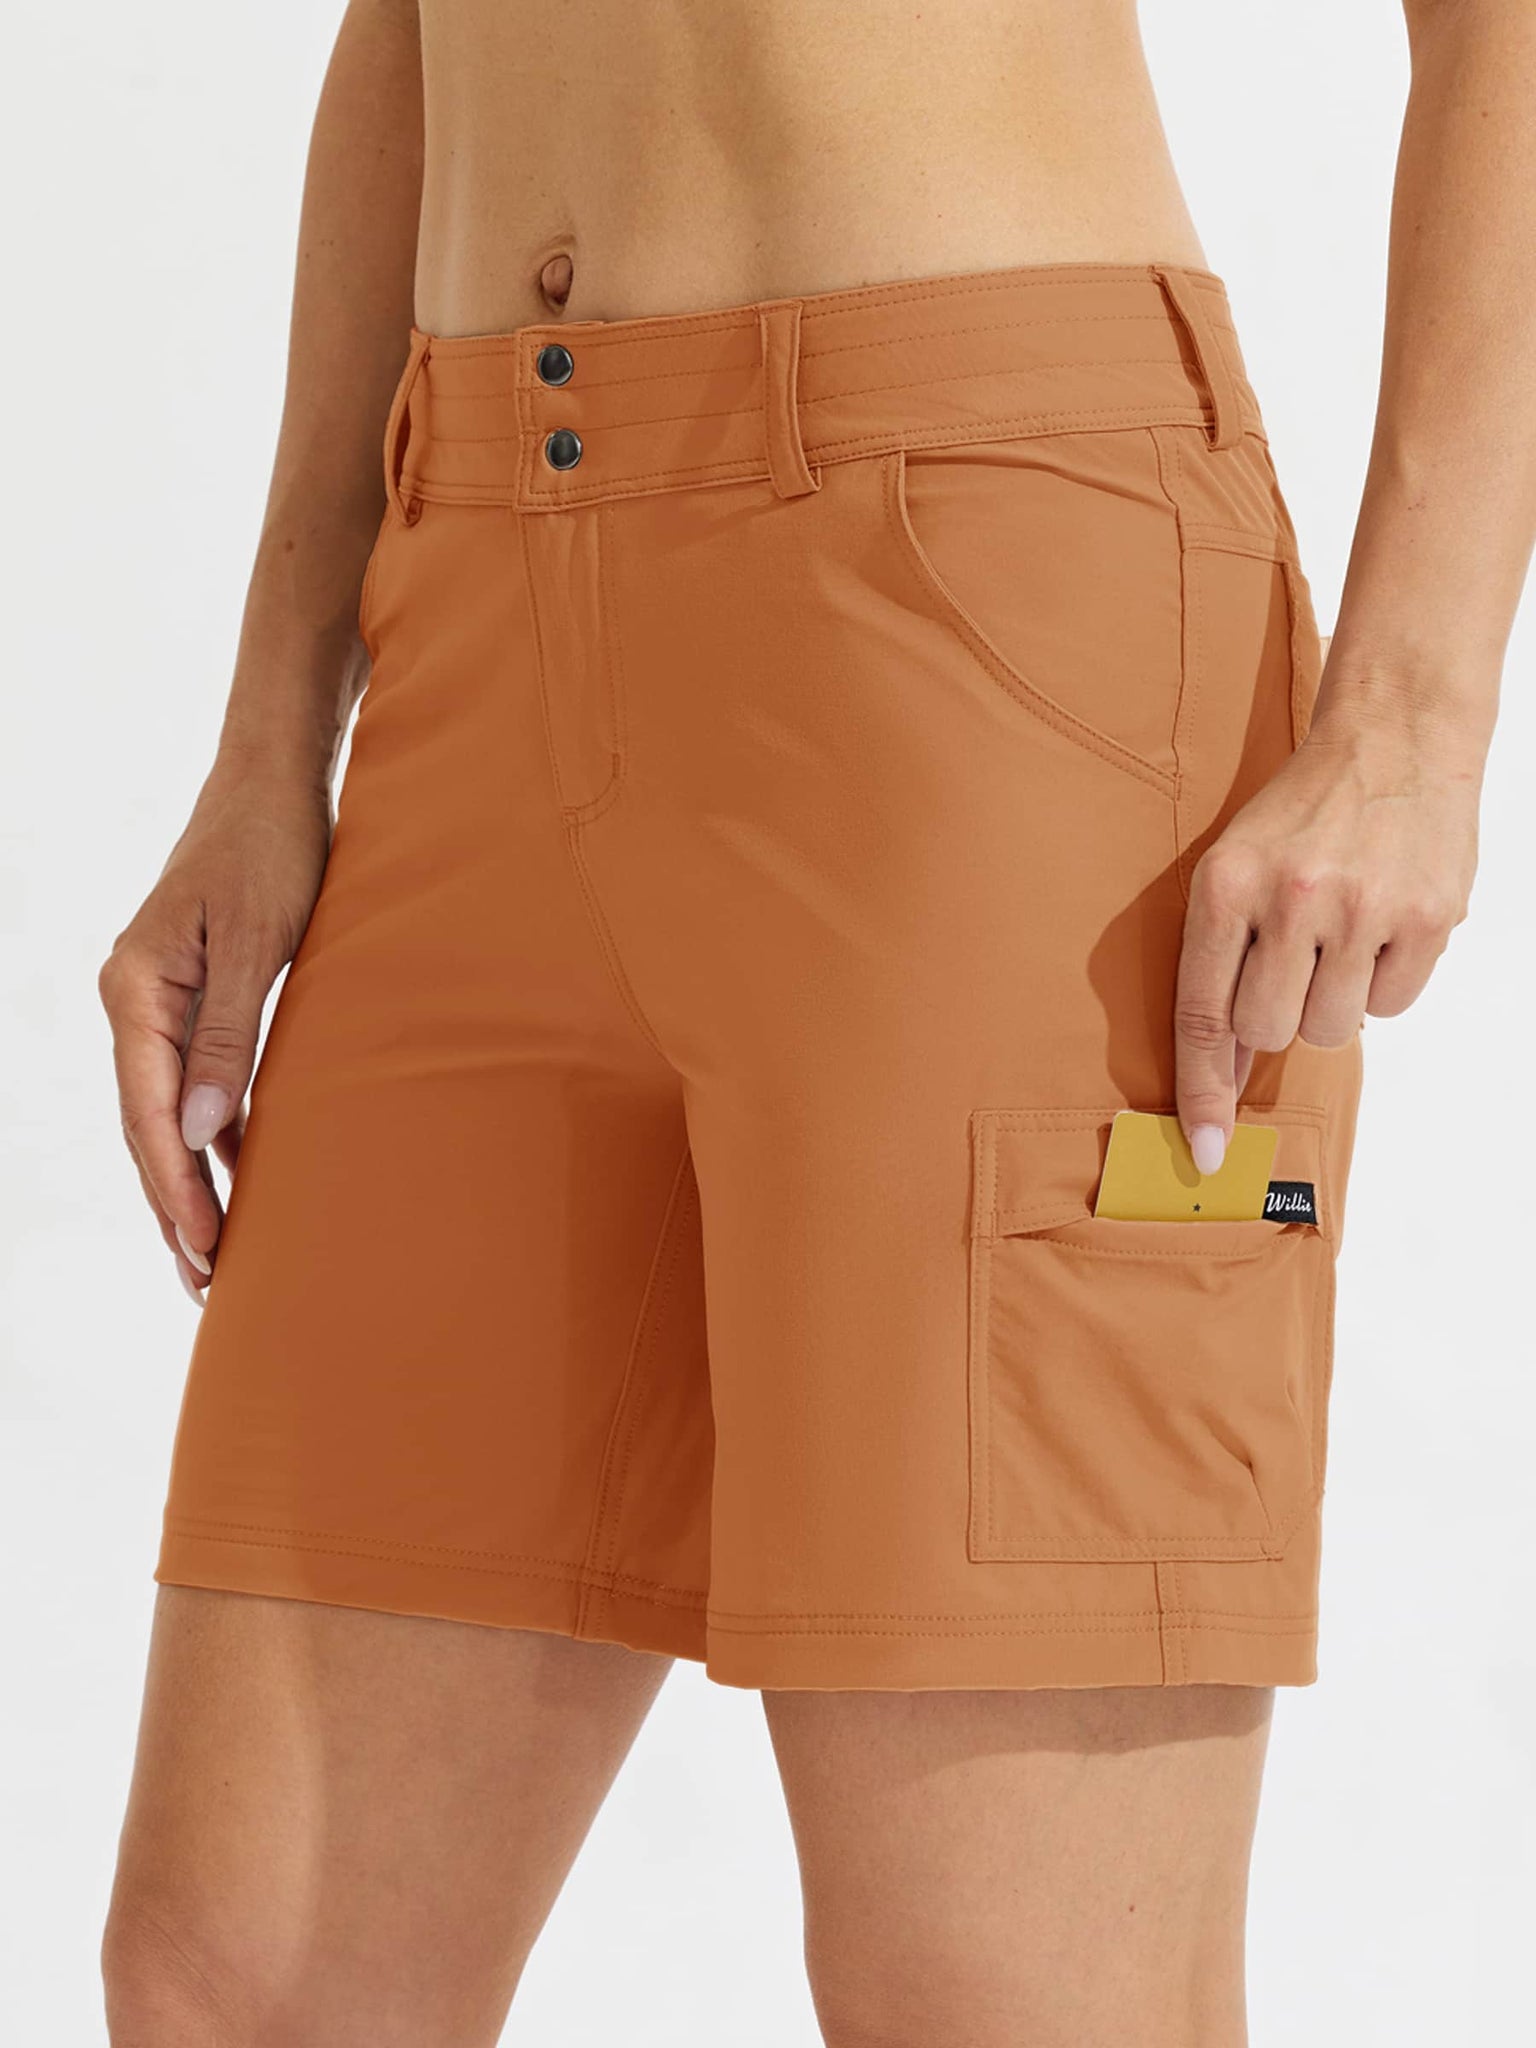 Women's Outdoor Pro Shorts Copper_hover_model